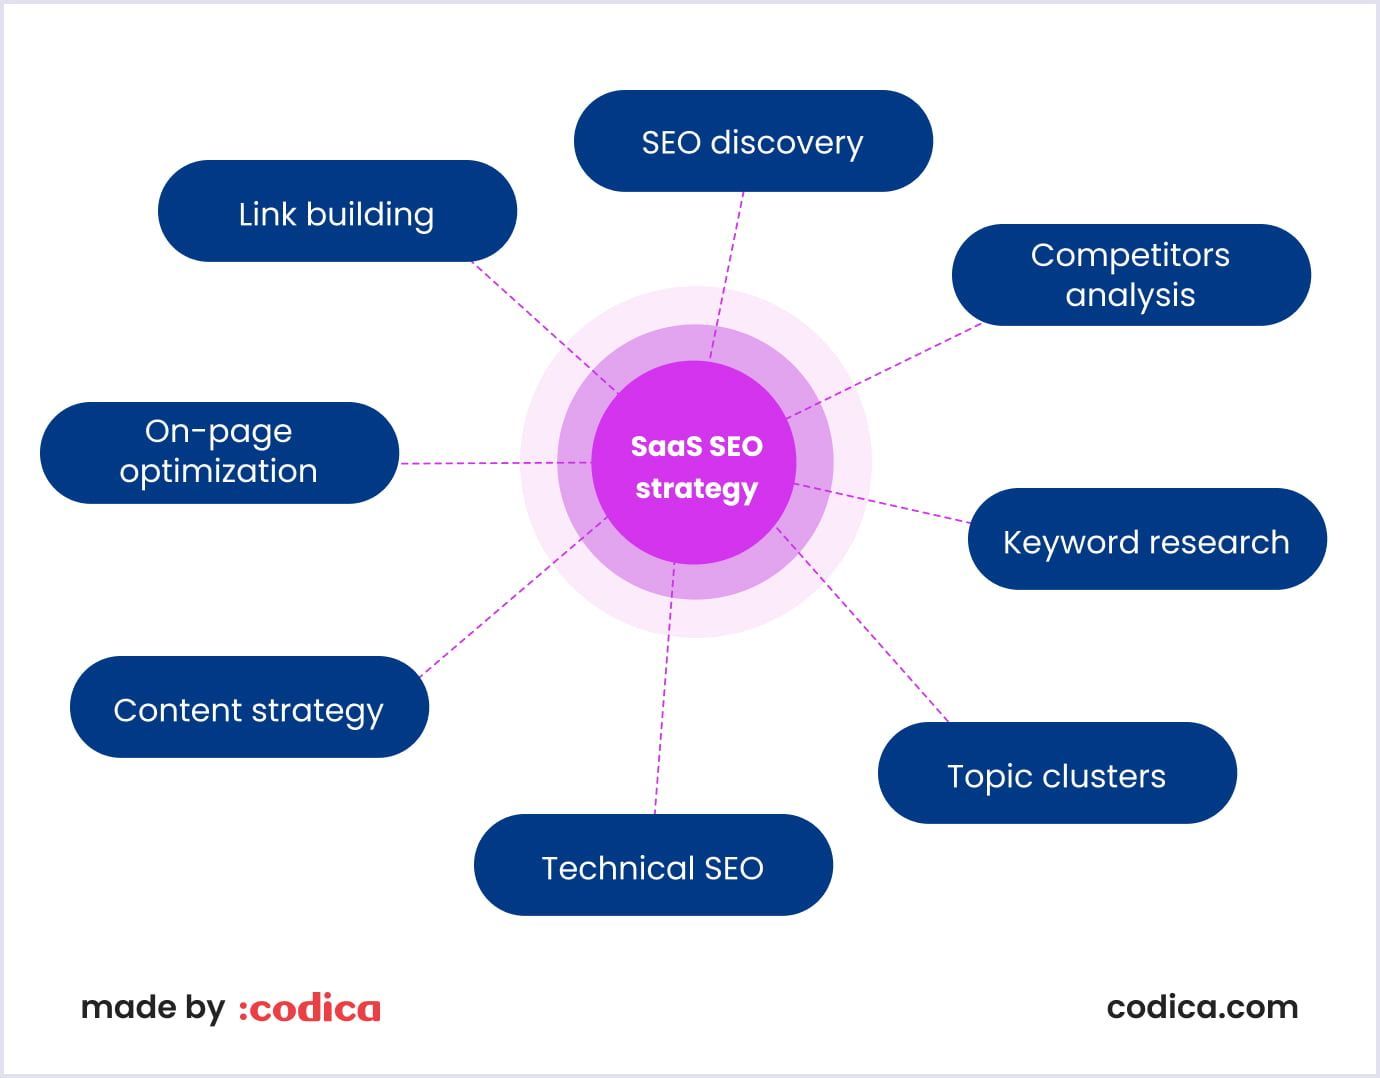 The process of developing a successful SaaS SEO strategy